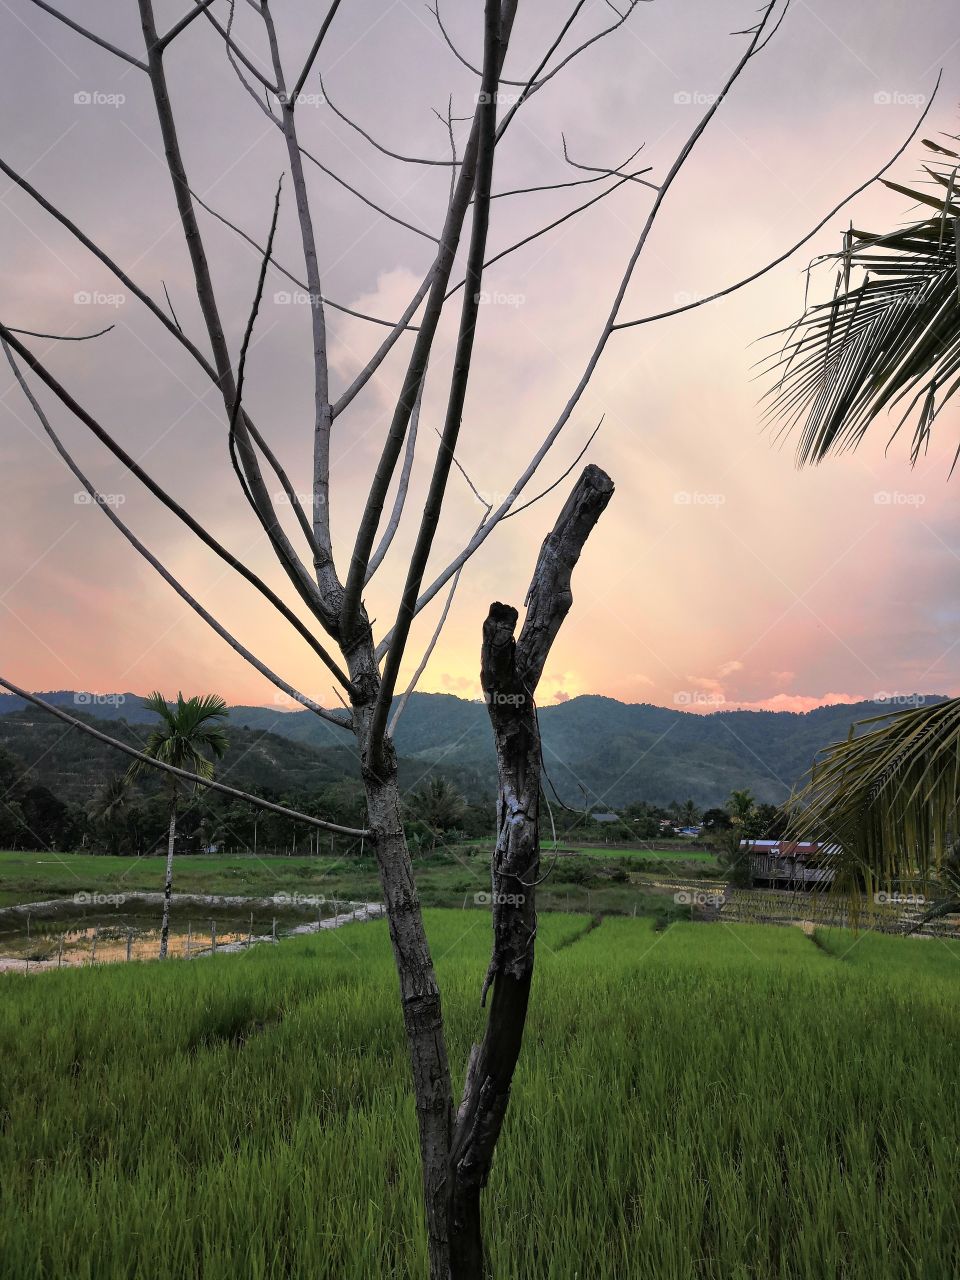 the sunset in my village. the paddy field with a green leaf make the scene look so amazing.